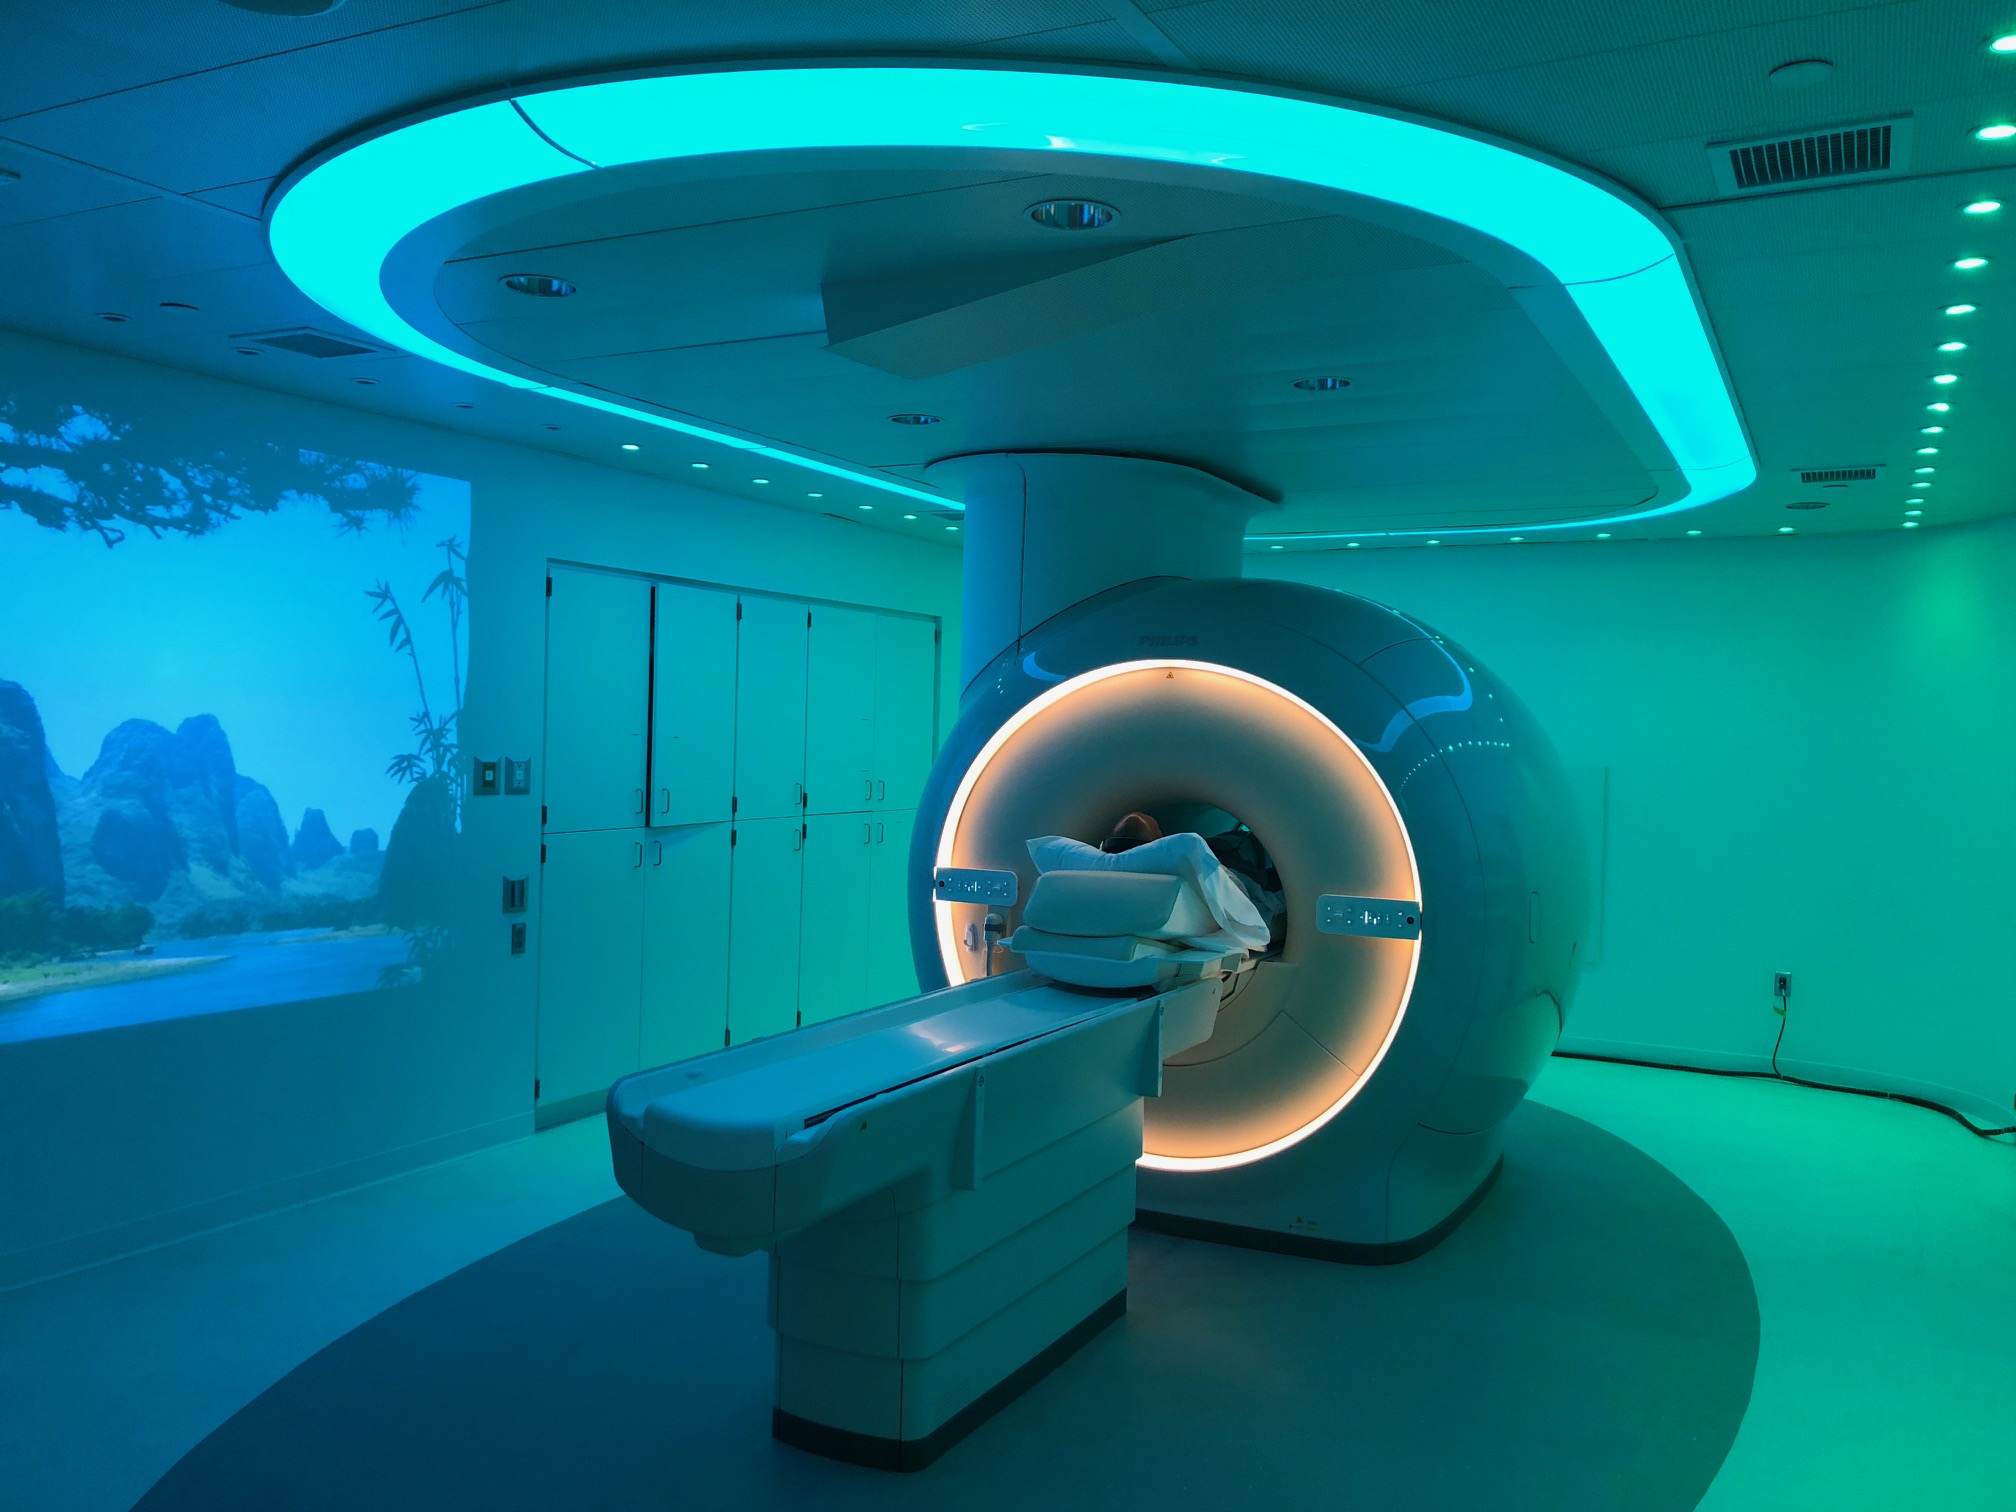 mri with scanner, Hennepin Healthcare Clinic and Specialty Center, fast-scanning MRI, comprehensive imaging services, Philips Ingenia Elition 3.0 MRI, Compressed Sense system t